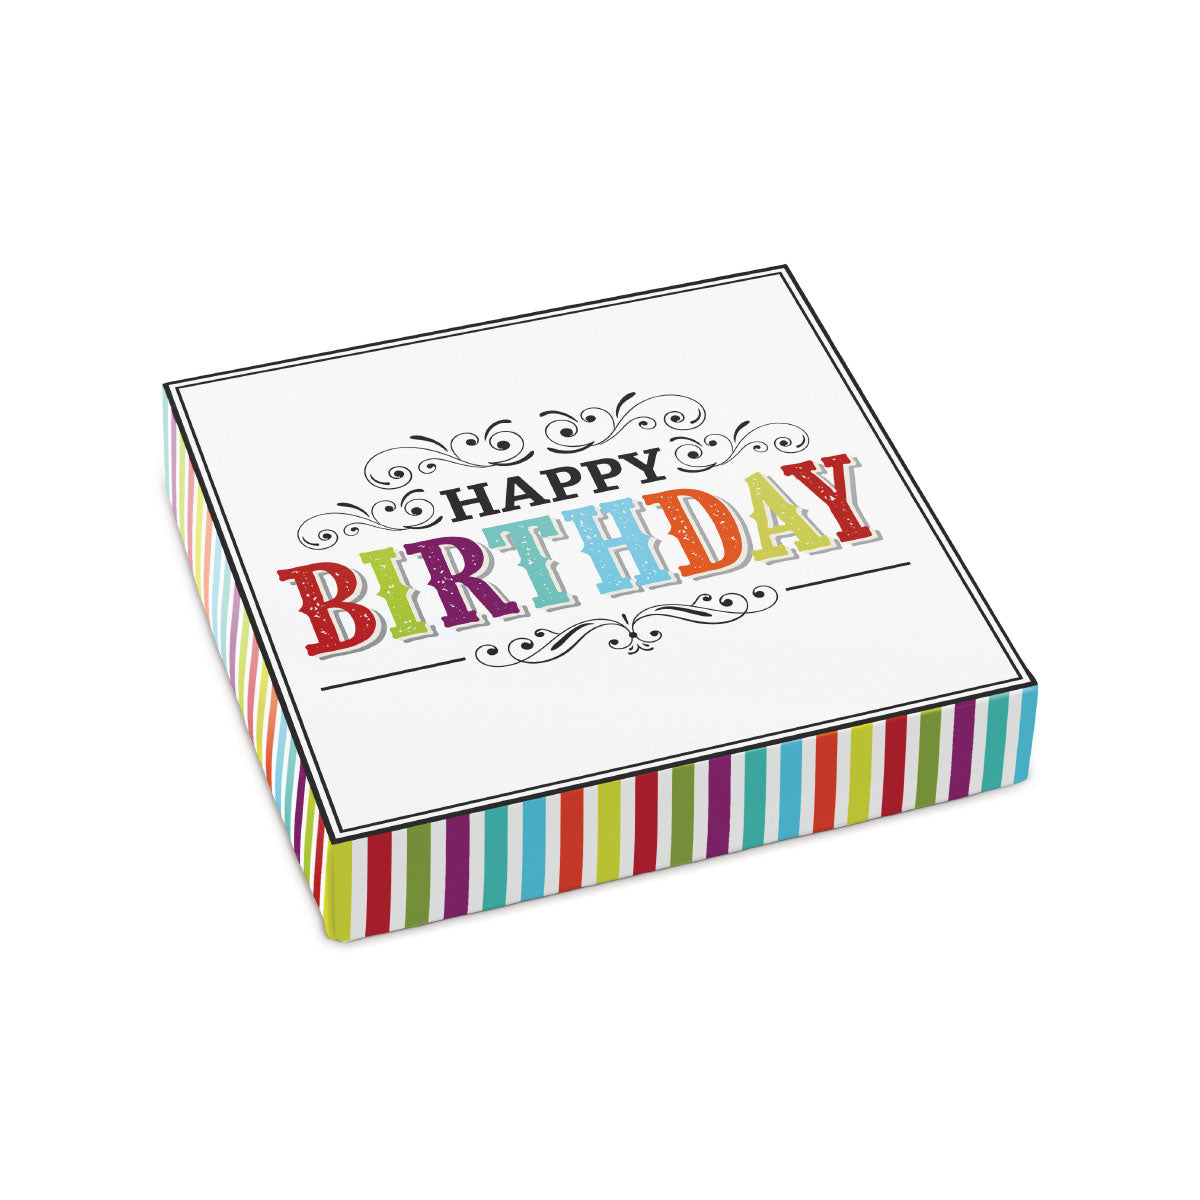 Happy Birthday Stripe Themed Box Cover for 9 Piece Holiday Assortment